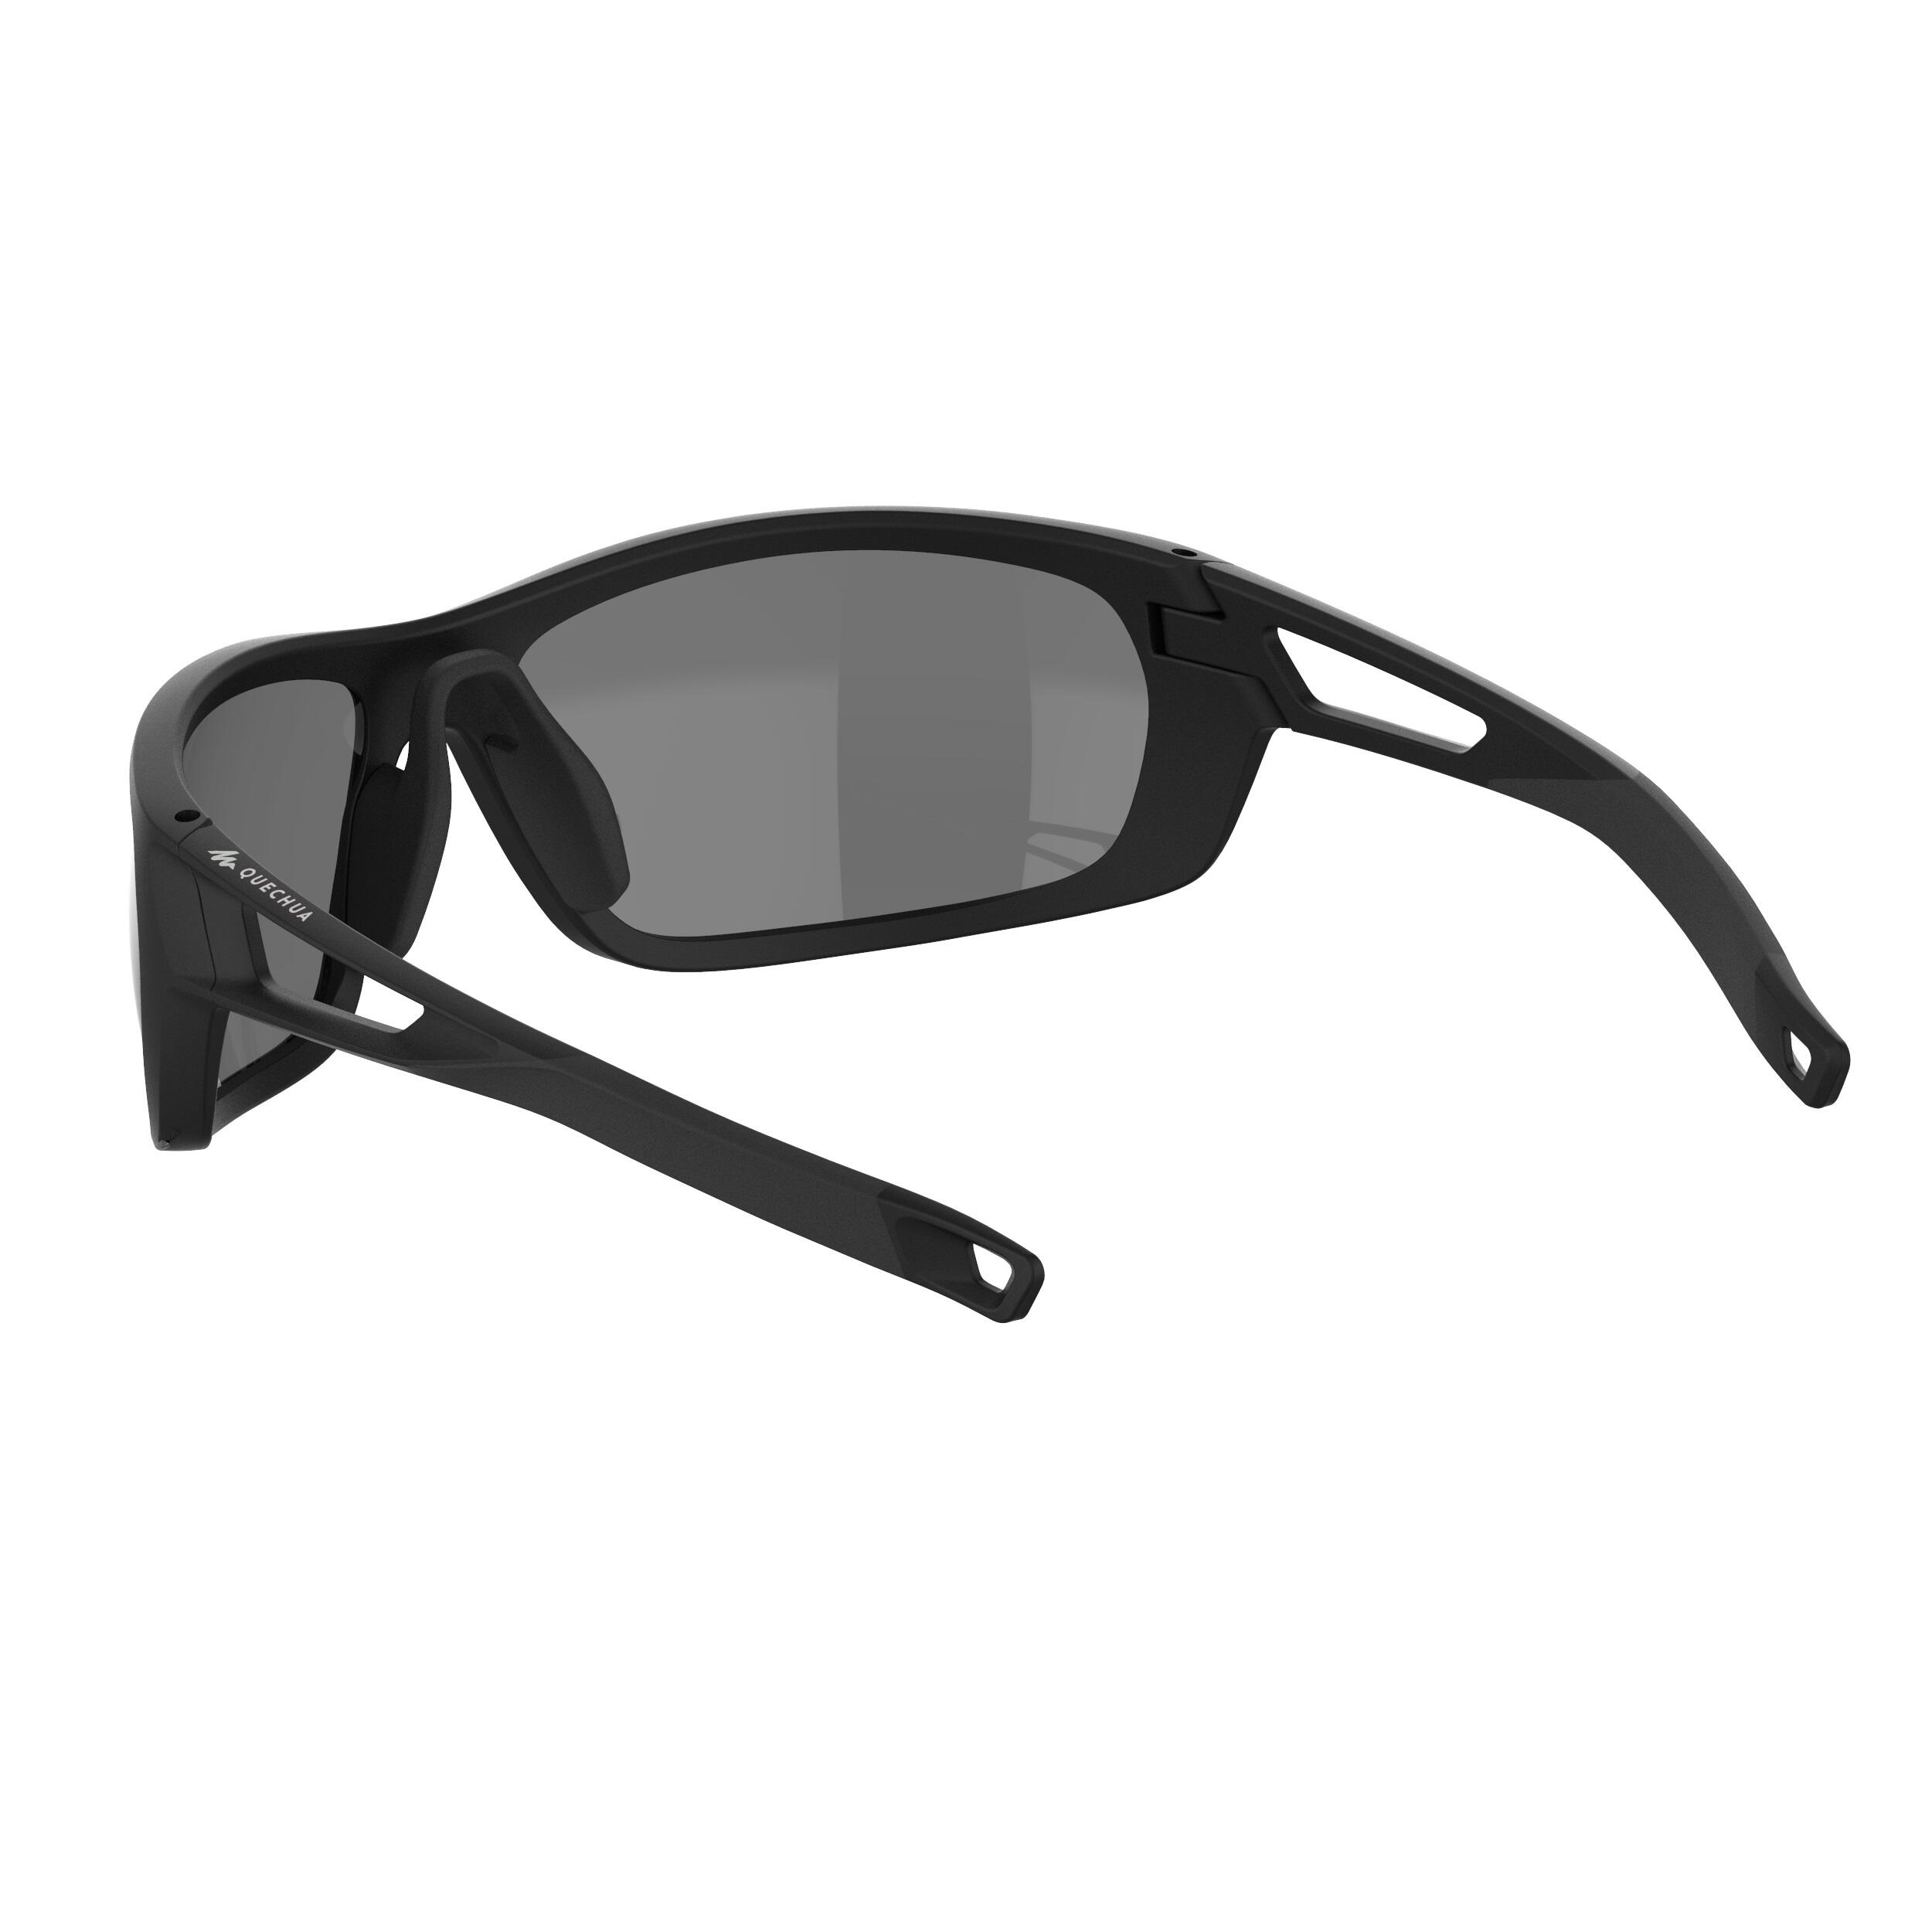 ADULT HIKING SUNGLASSES FOR YOUR EYESIGHT - MH580 - POLARISED CATEGORY 3 2/4